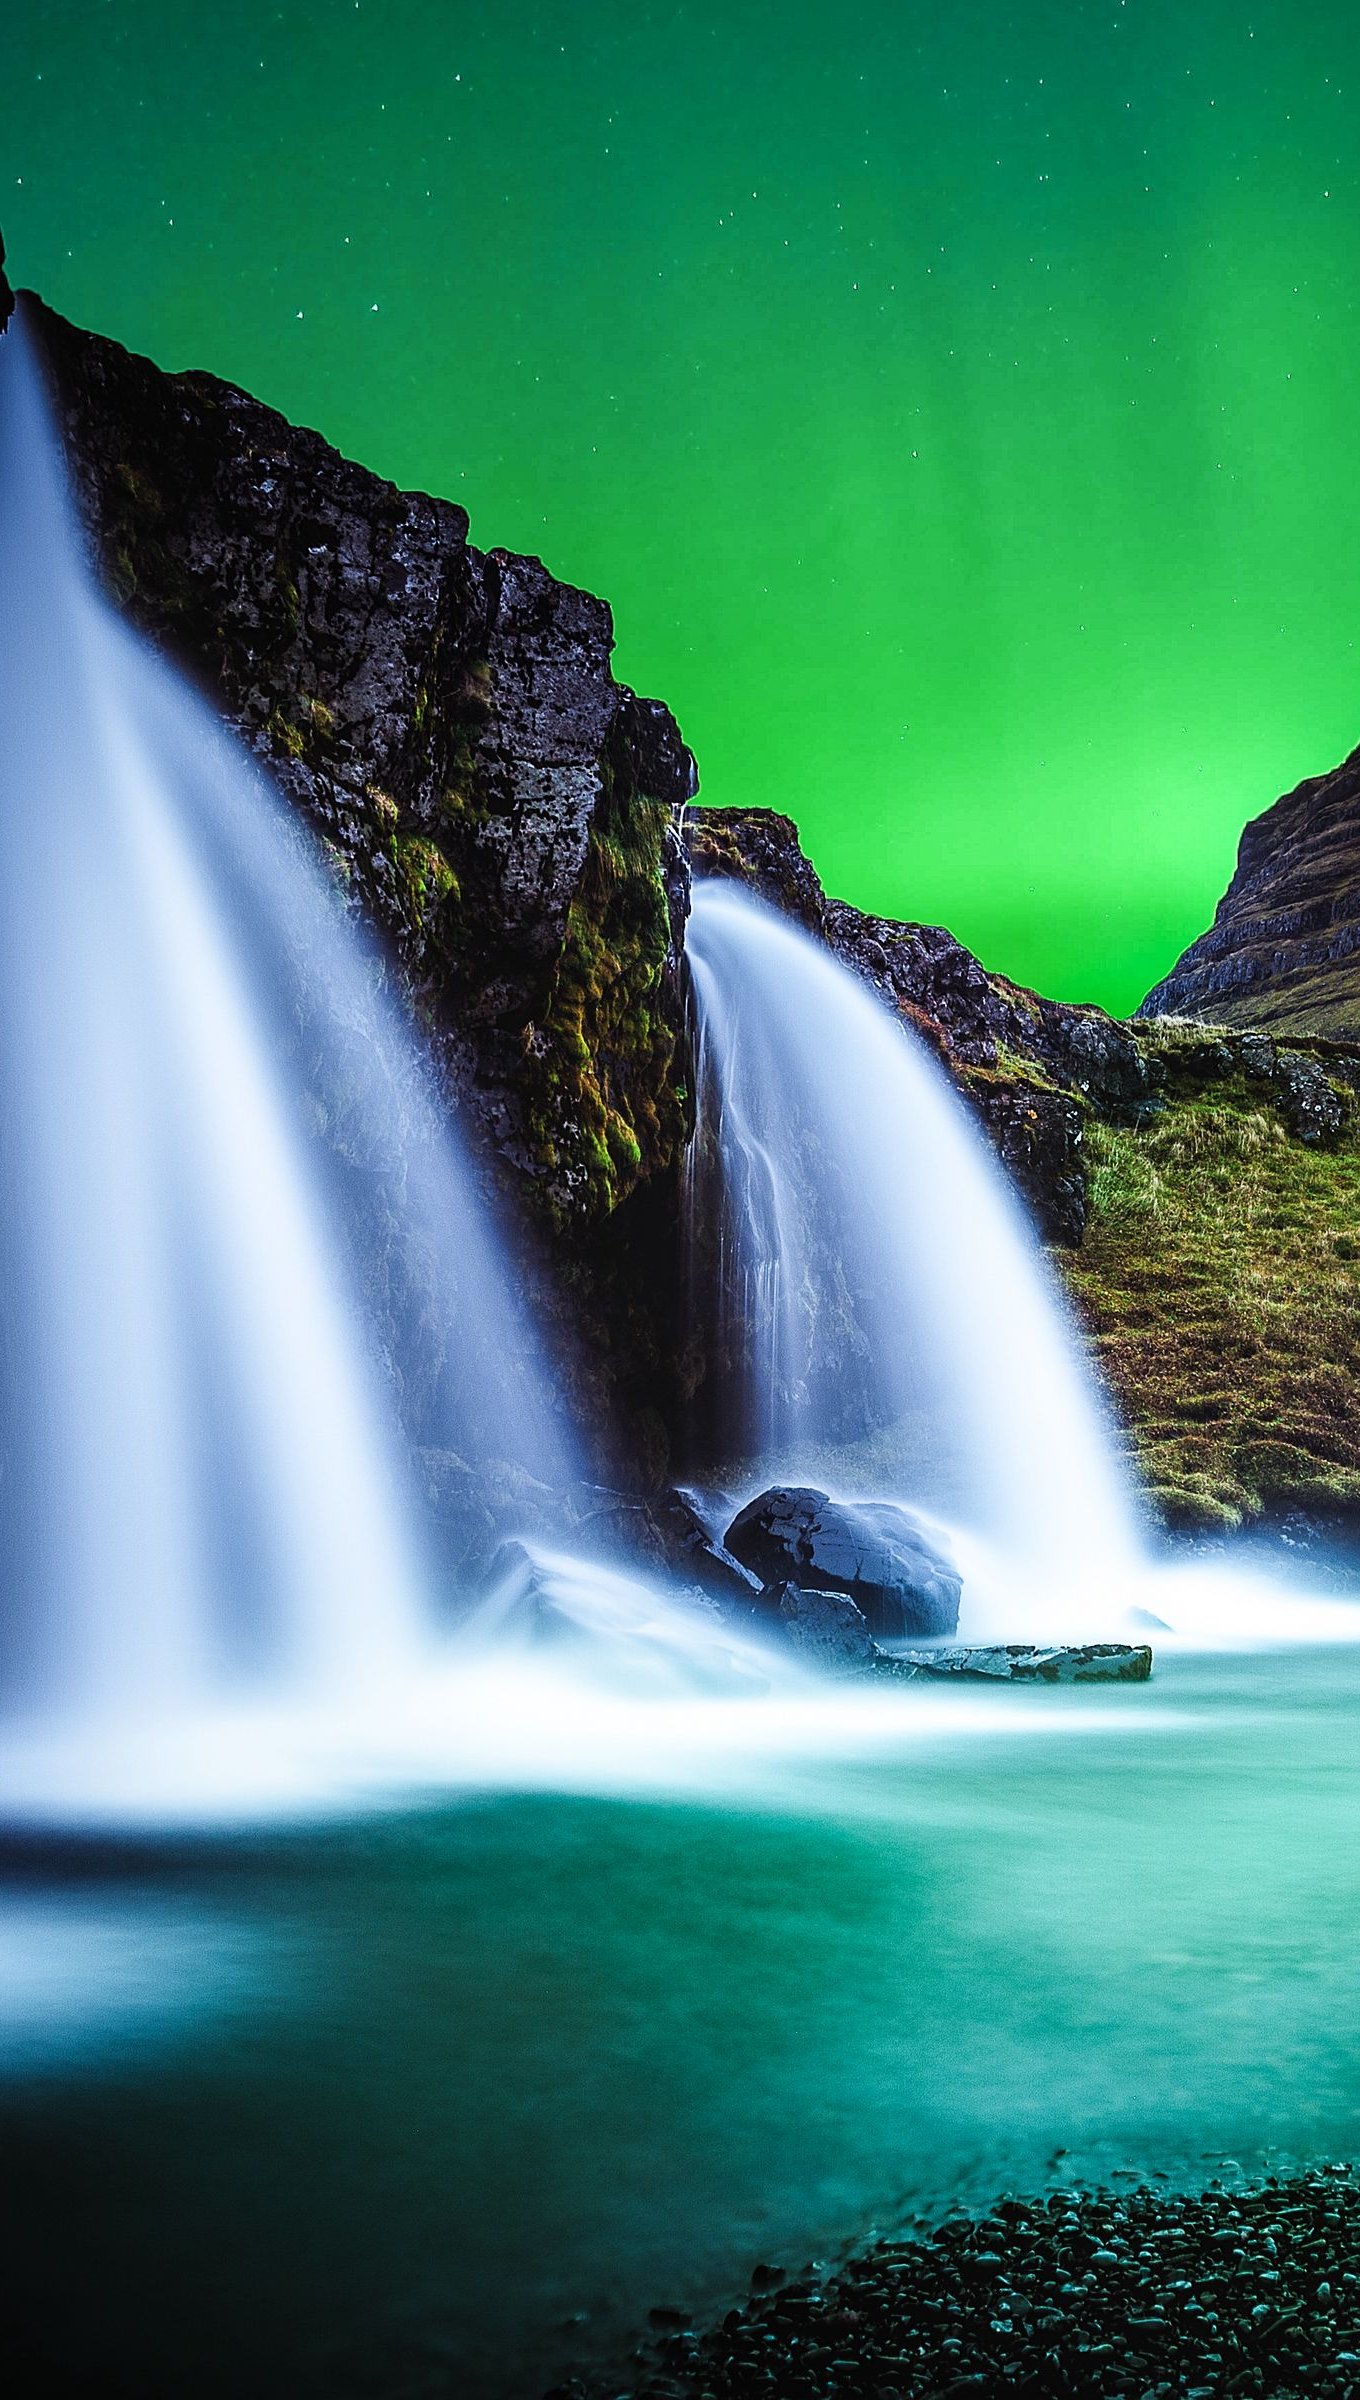 Waterfall and mountain with northern lights Wallpaper 4k Ultra HD ID:10866